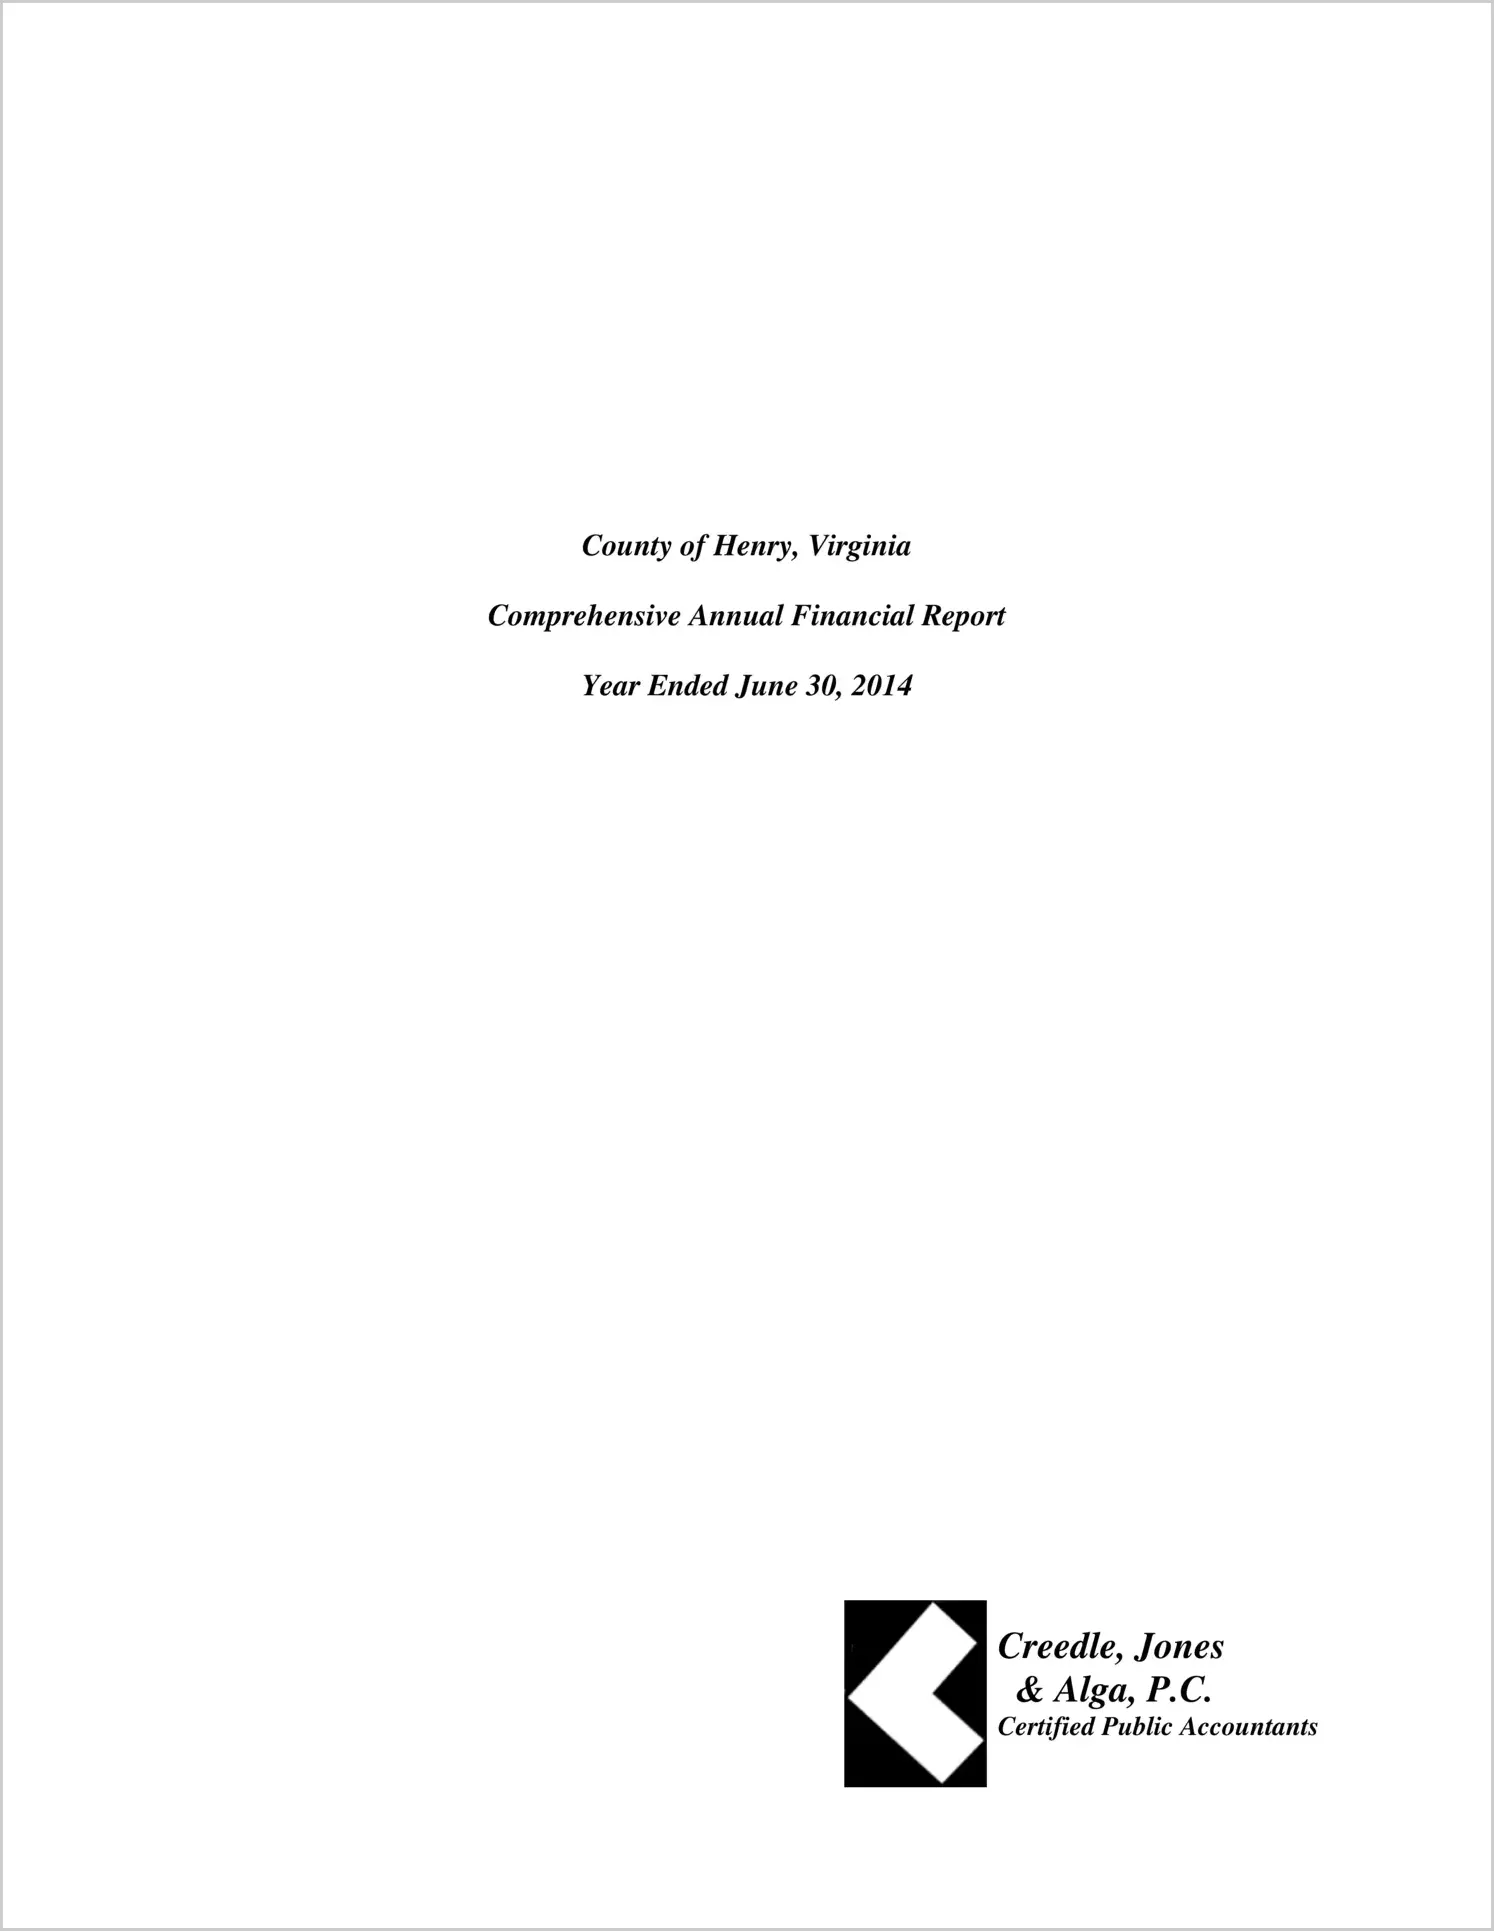 2014 Annual Financial Report for County of Henry